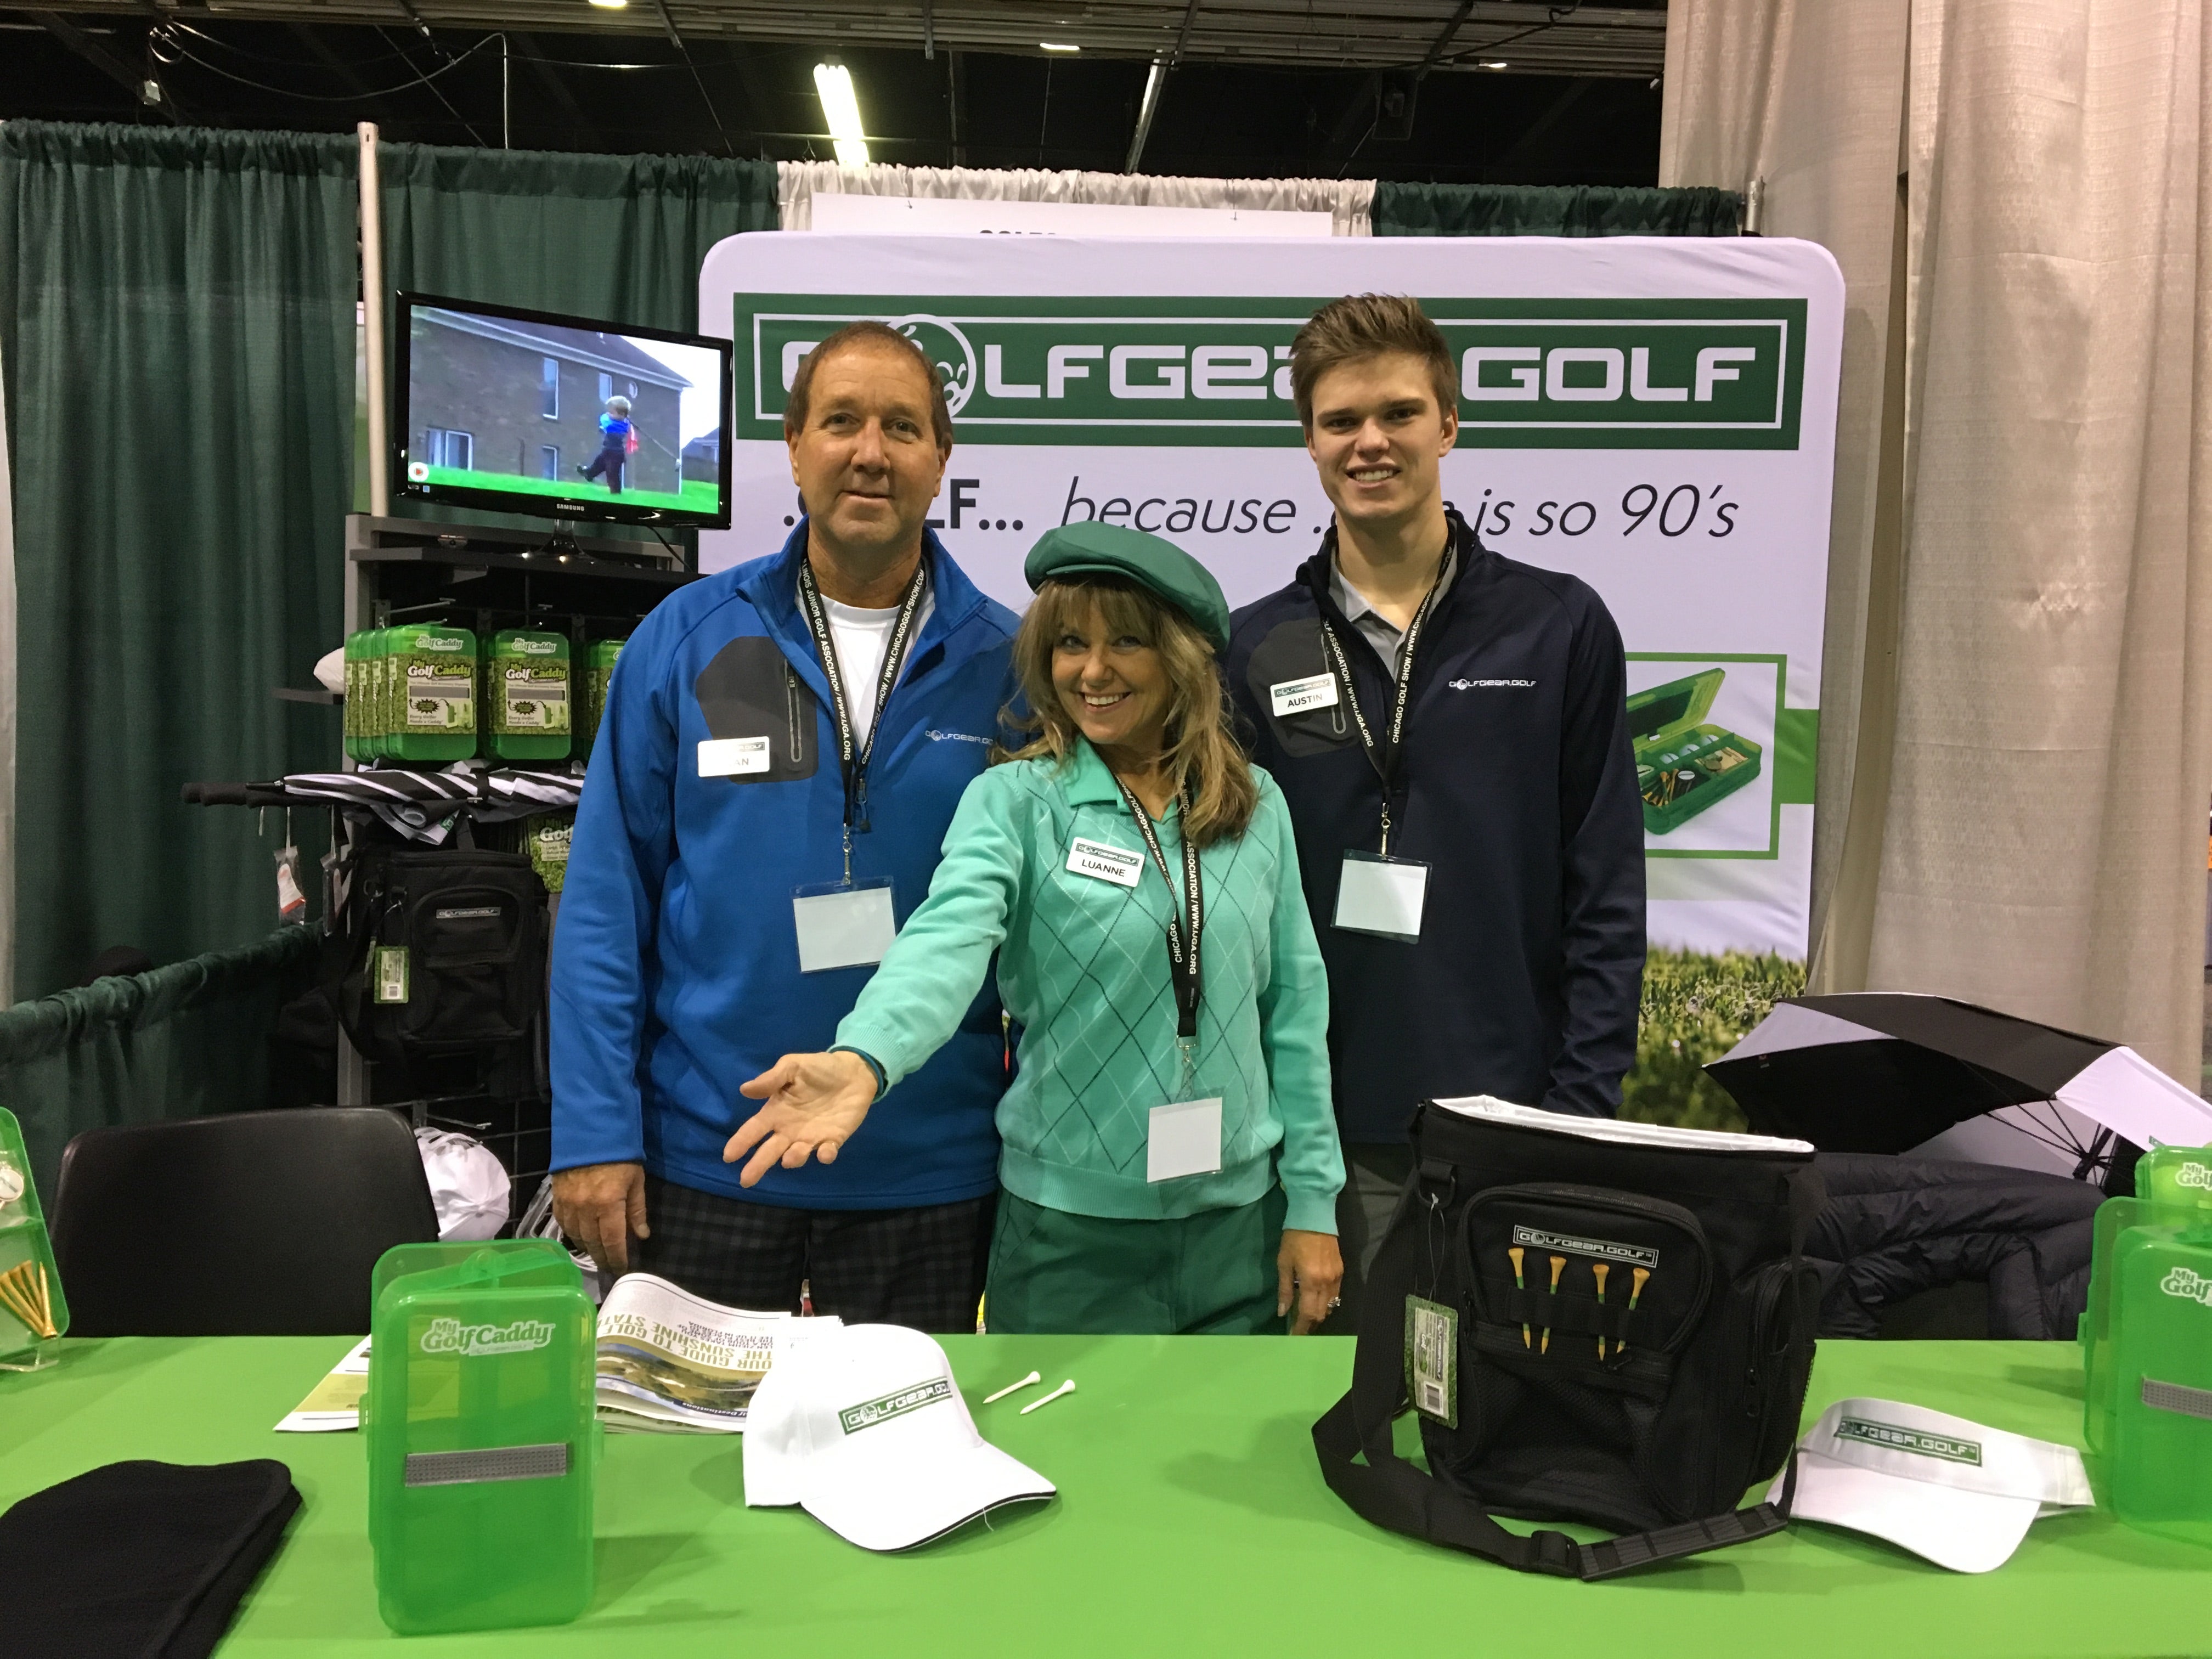 GolfGear.Golf at the Chicago Golf Show in Rosemont, IL GolfGear™